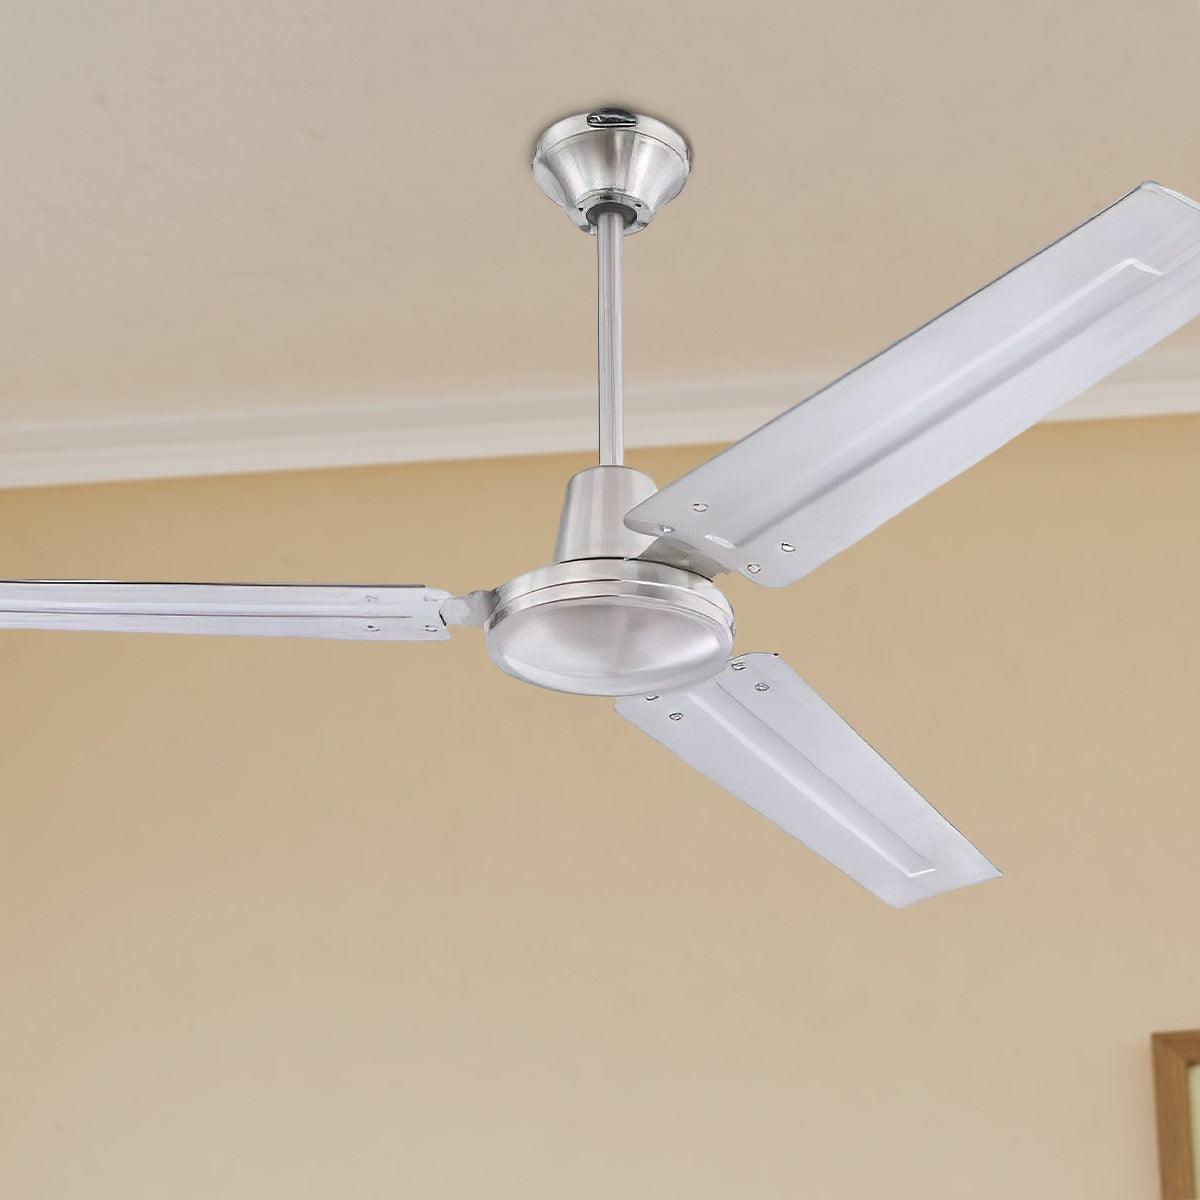 Jax 56 Inch Industrial Ceiling Fan, Brushed Nickel Finish, Wall Control Included - Bees Lighting